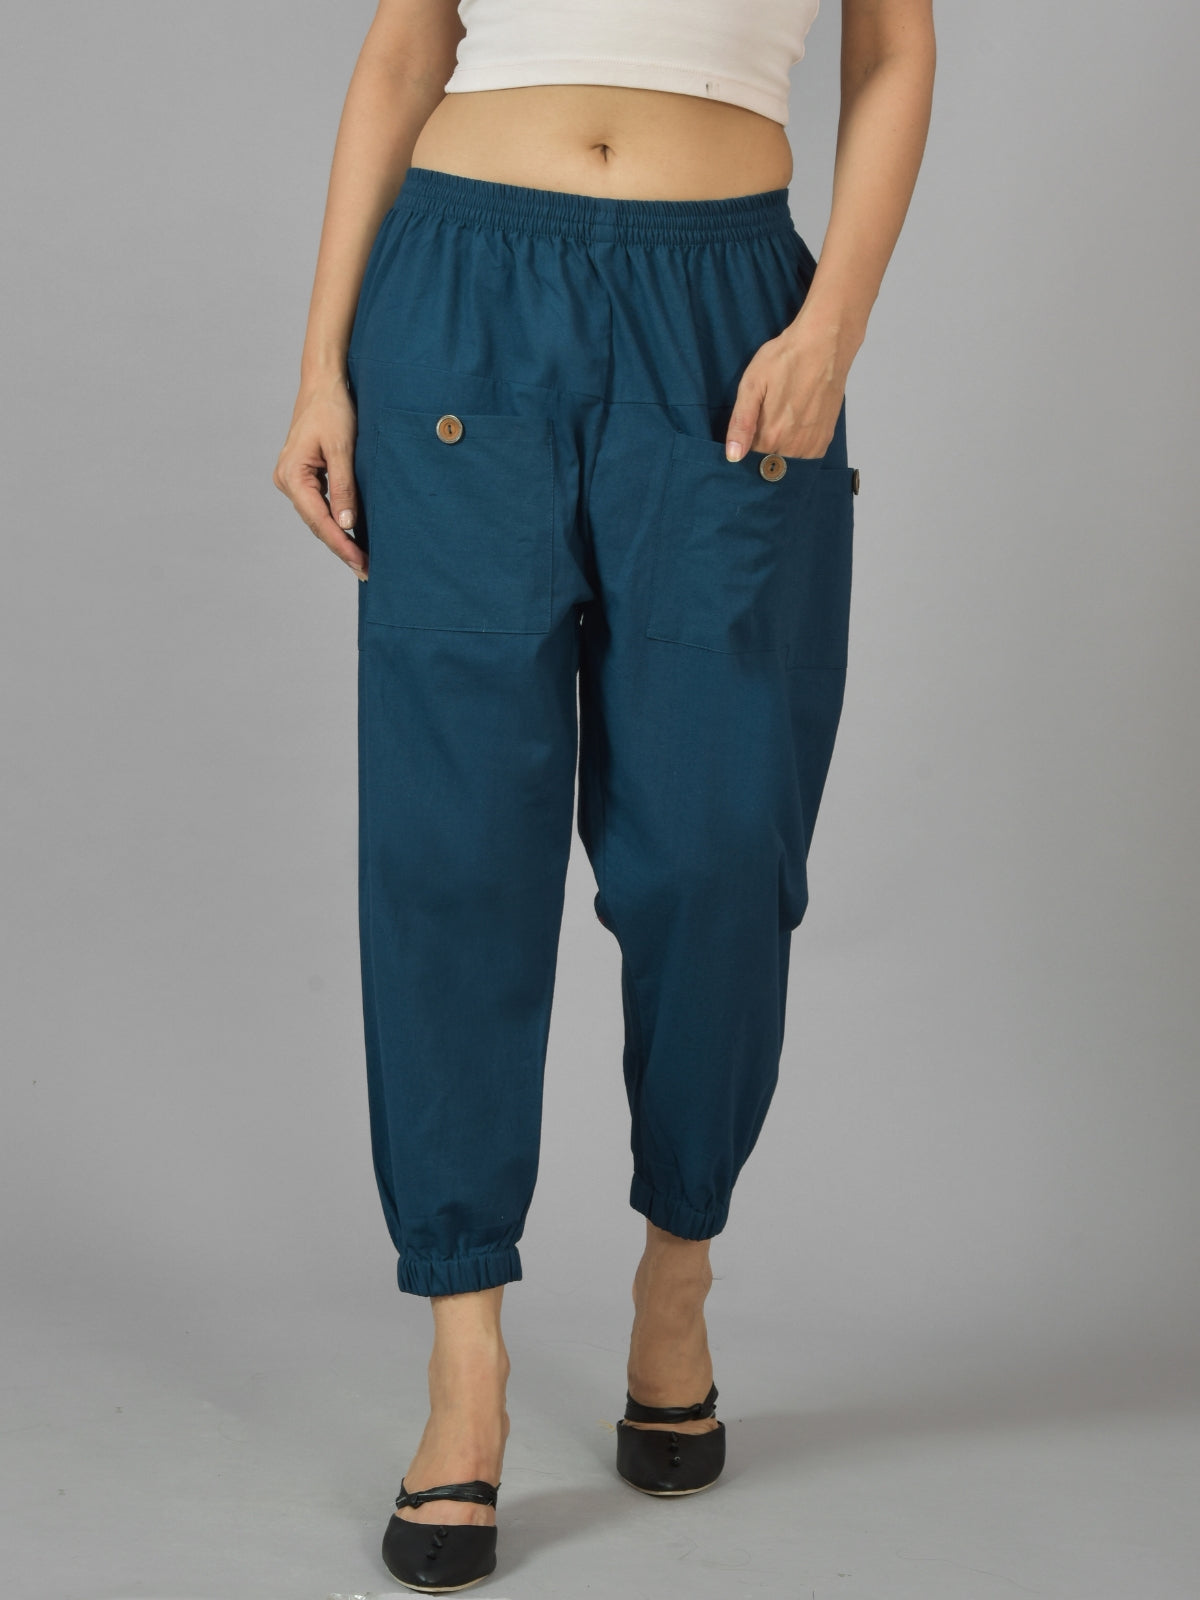 Combo Pack Of Womens Teal Blue And White Four Pocket Cotton Cargo Pants